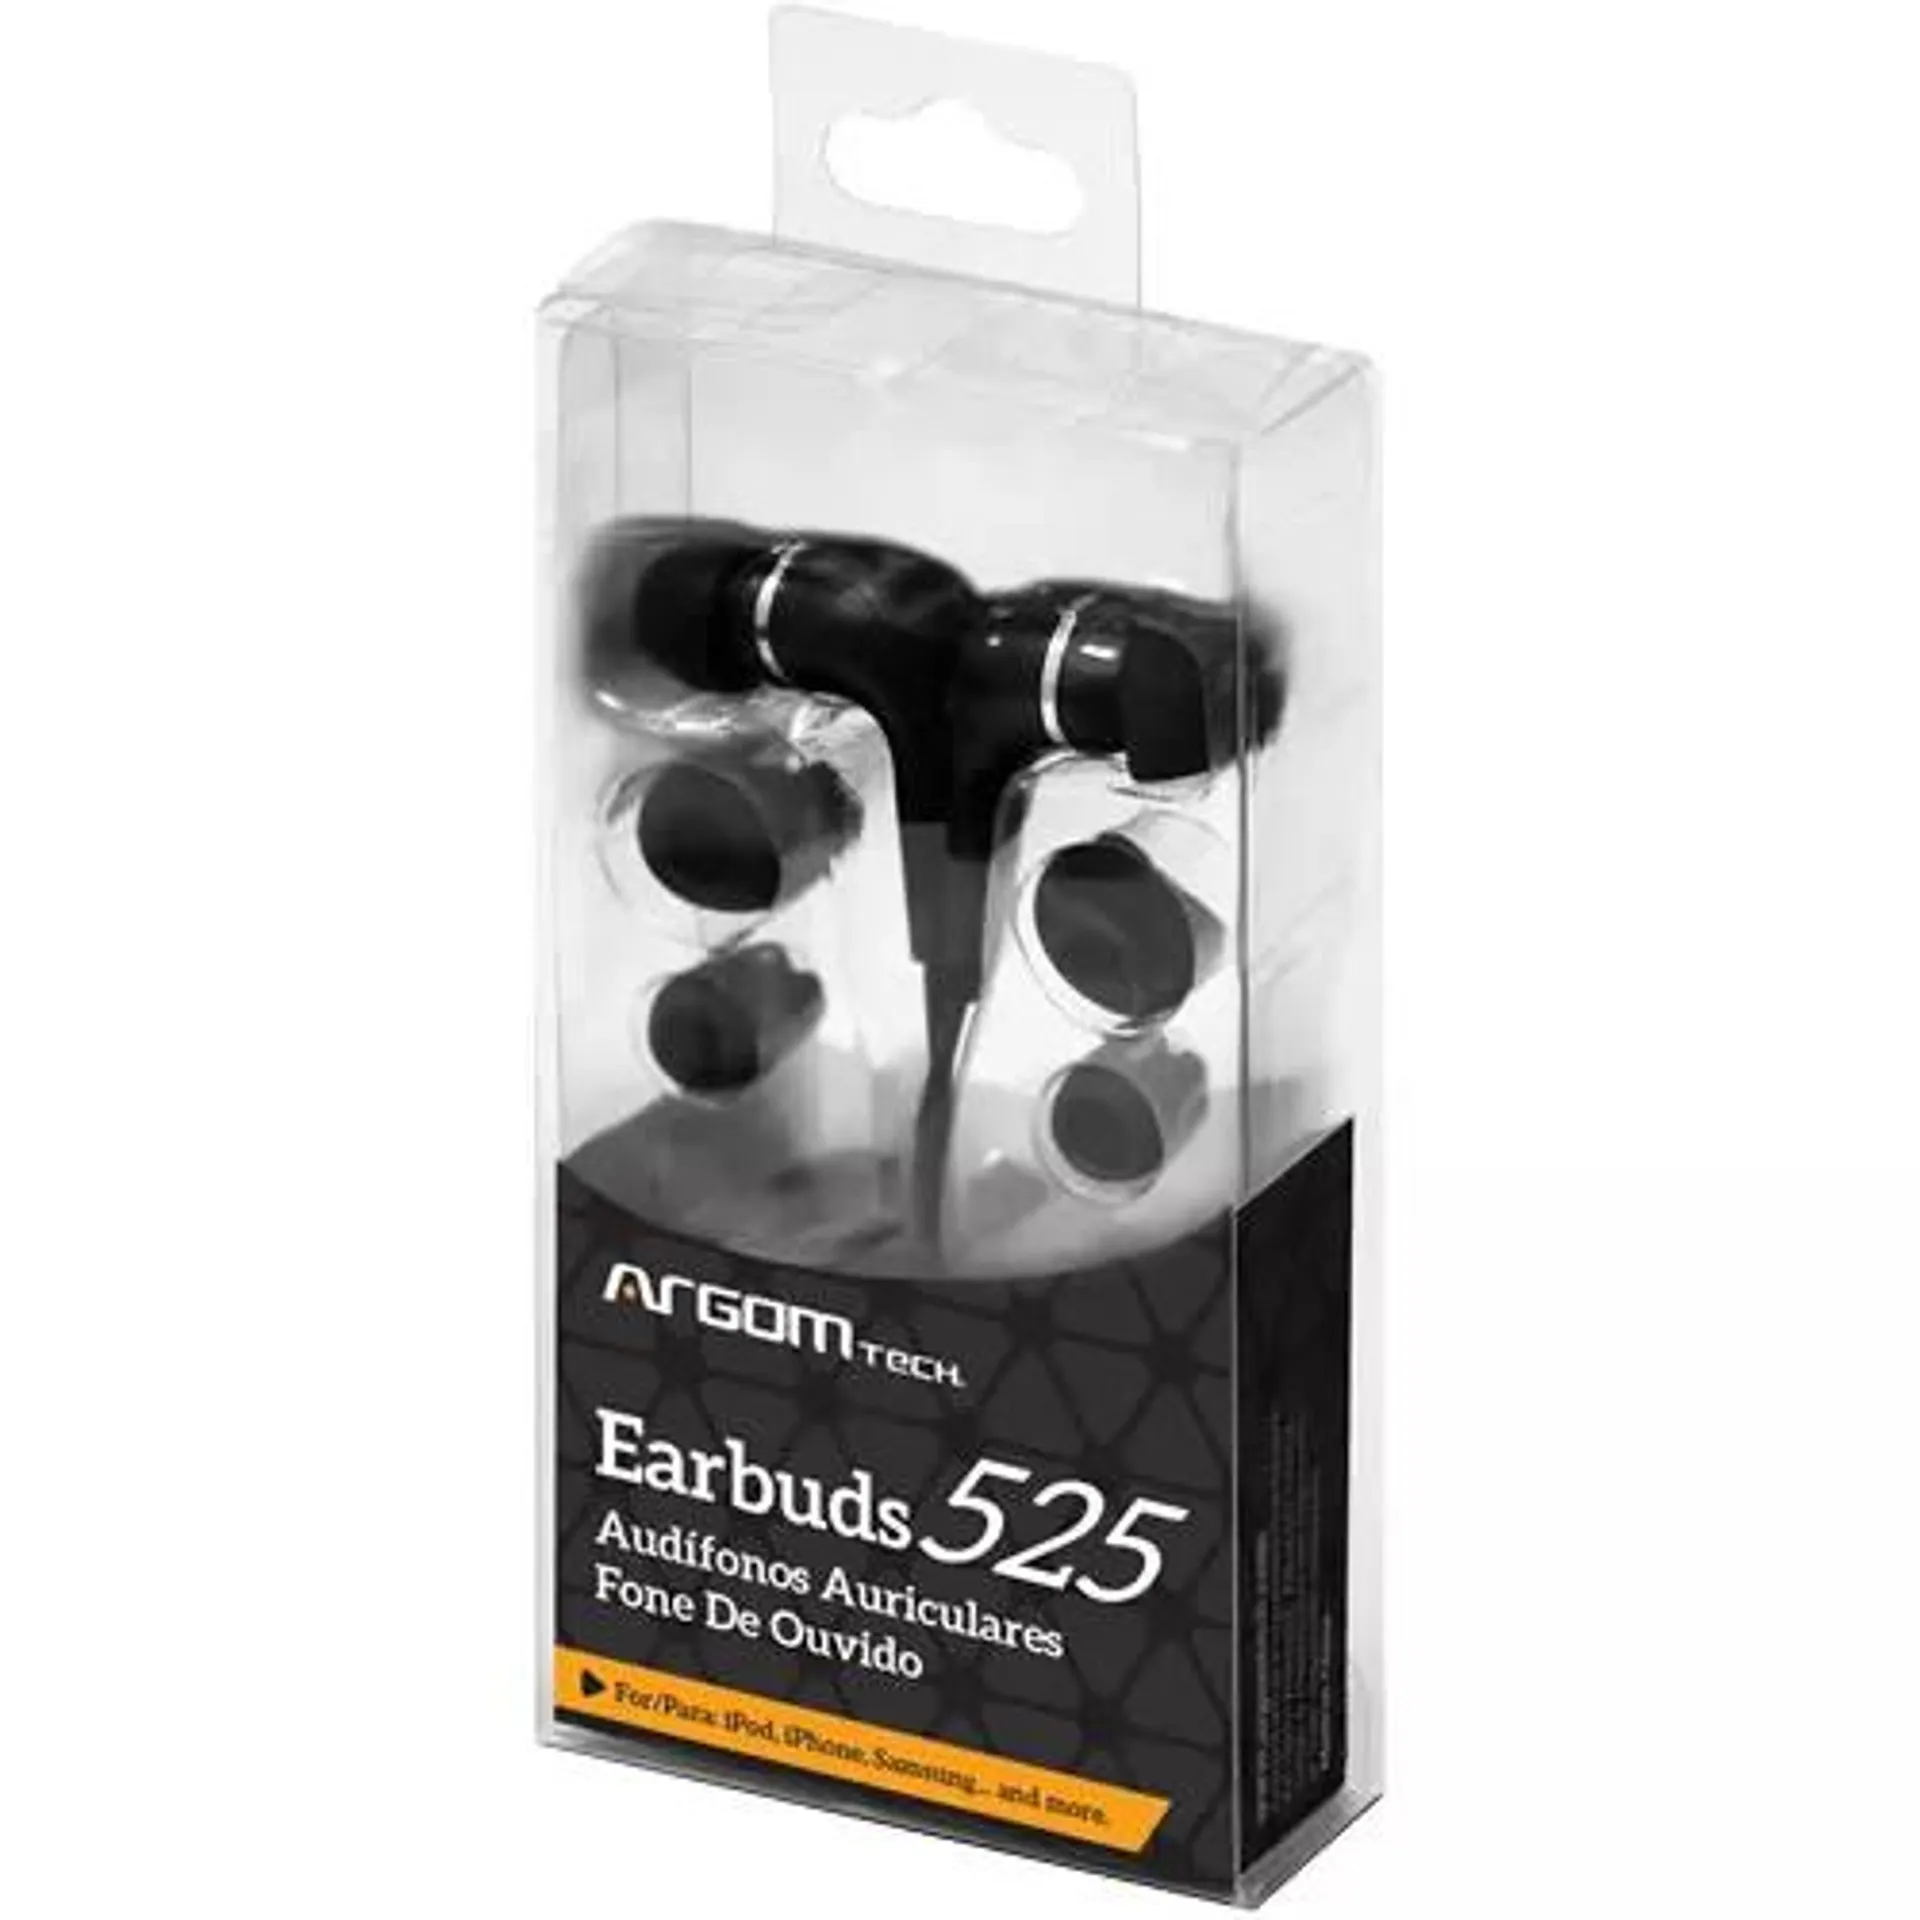 Audifono Earbuds 525 negro pn: ARG-HS-0525B